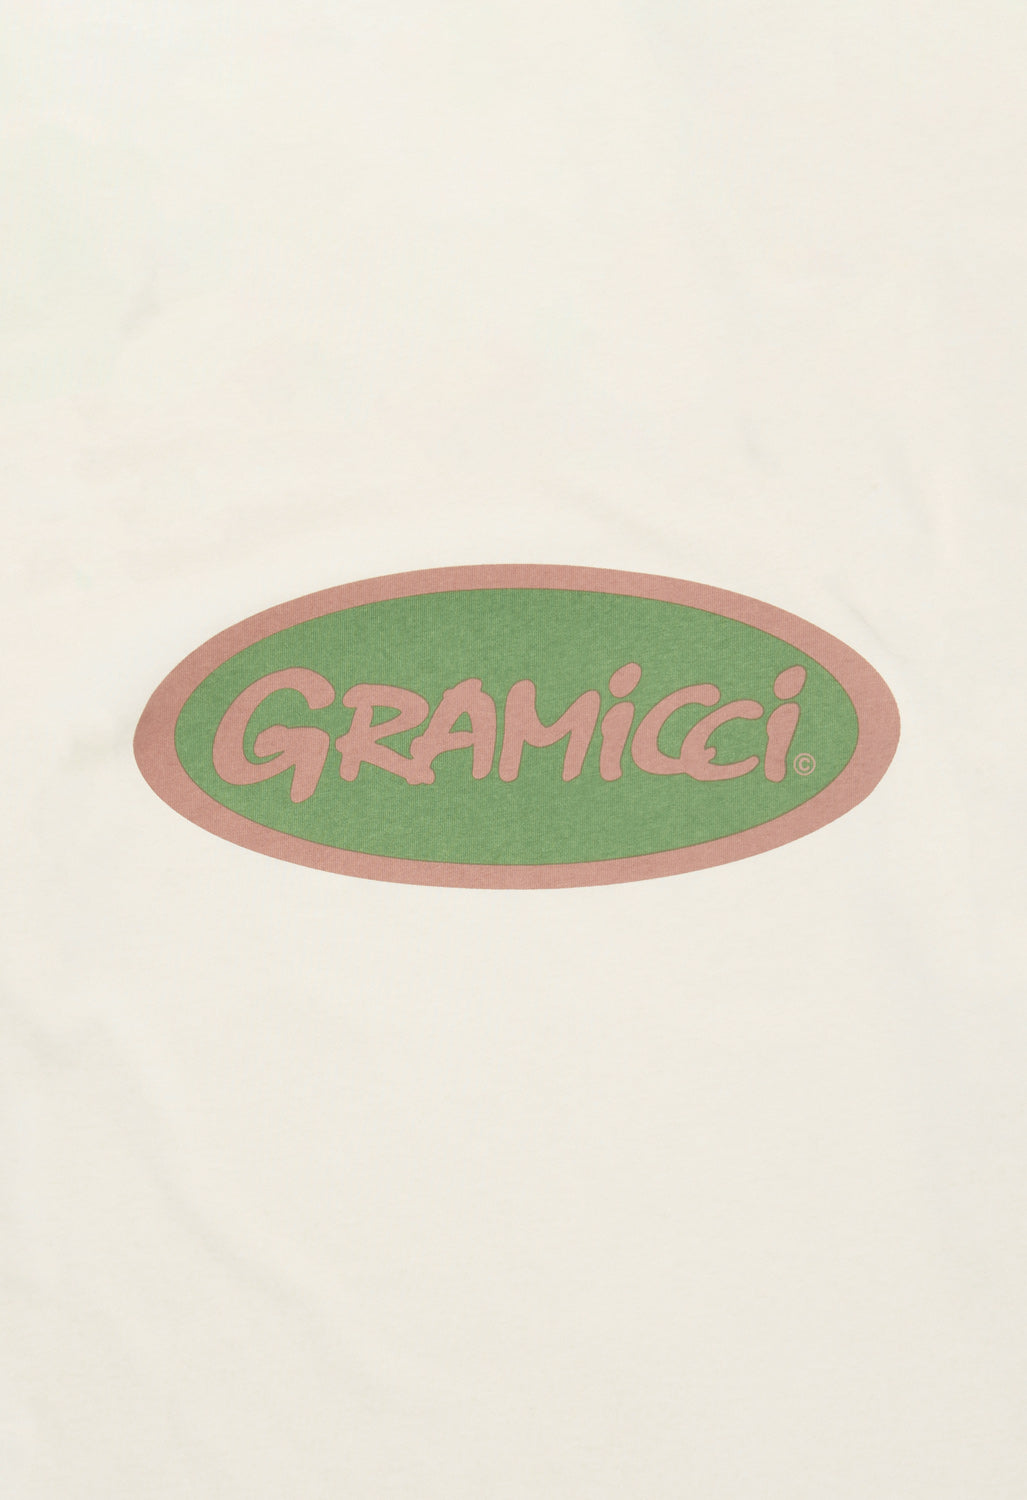 Gramicci Oval Long Sleeved Tee - Sand Pigment